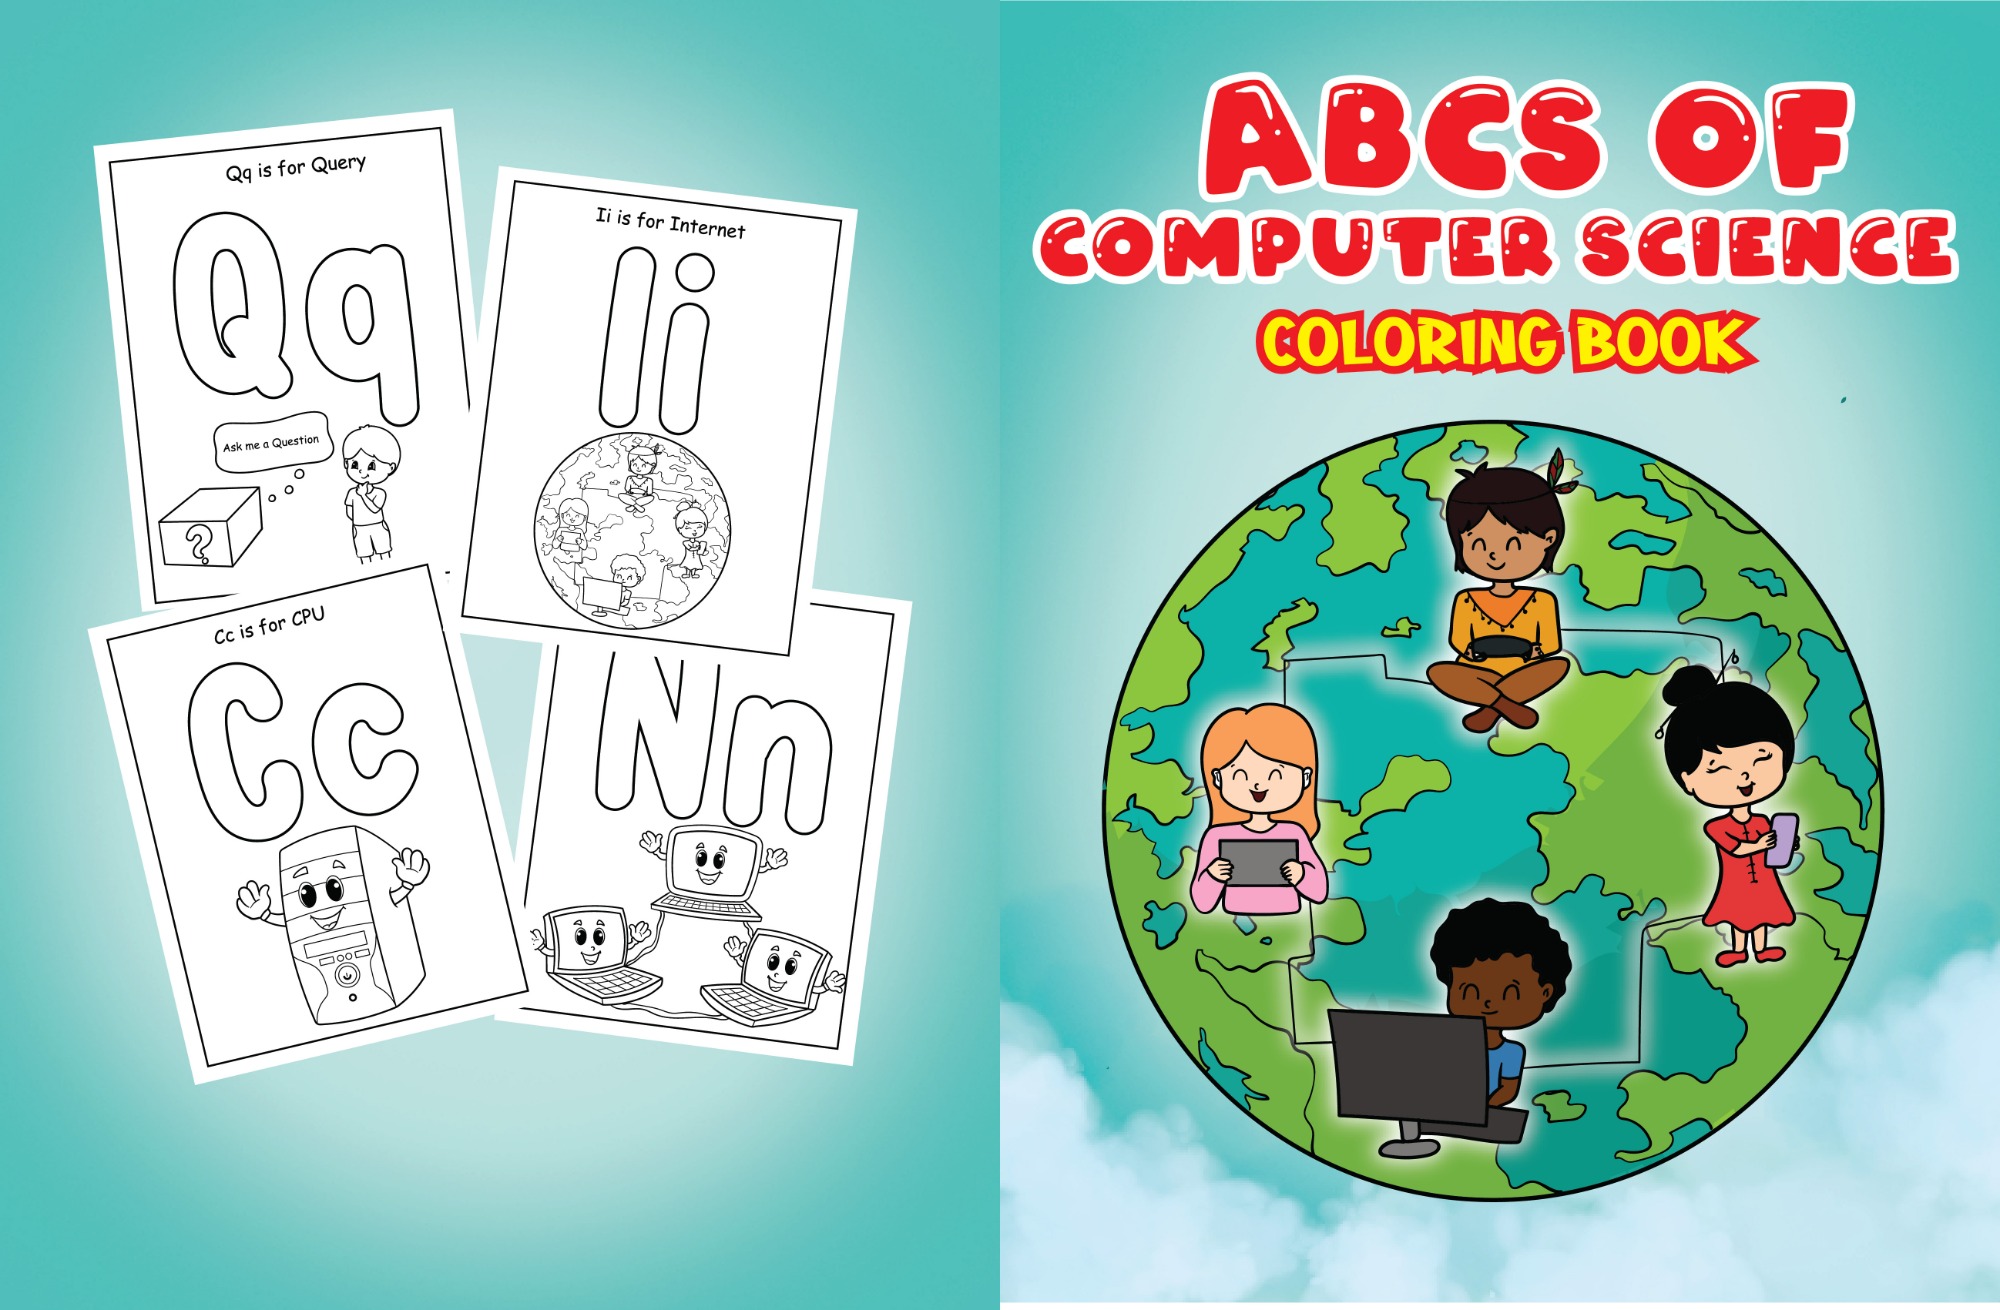 ABCs of Computer Science